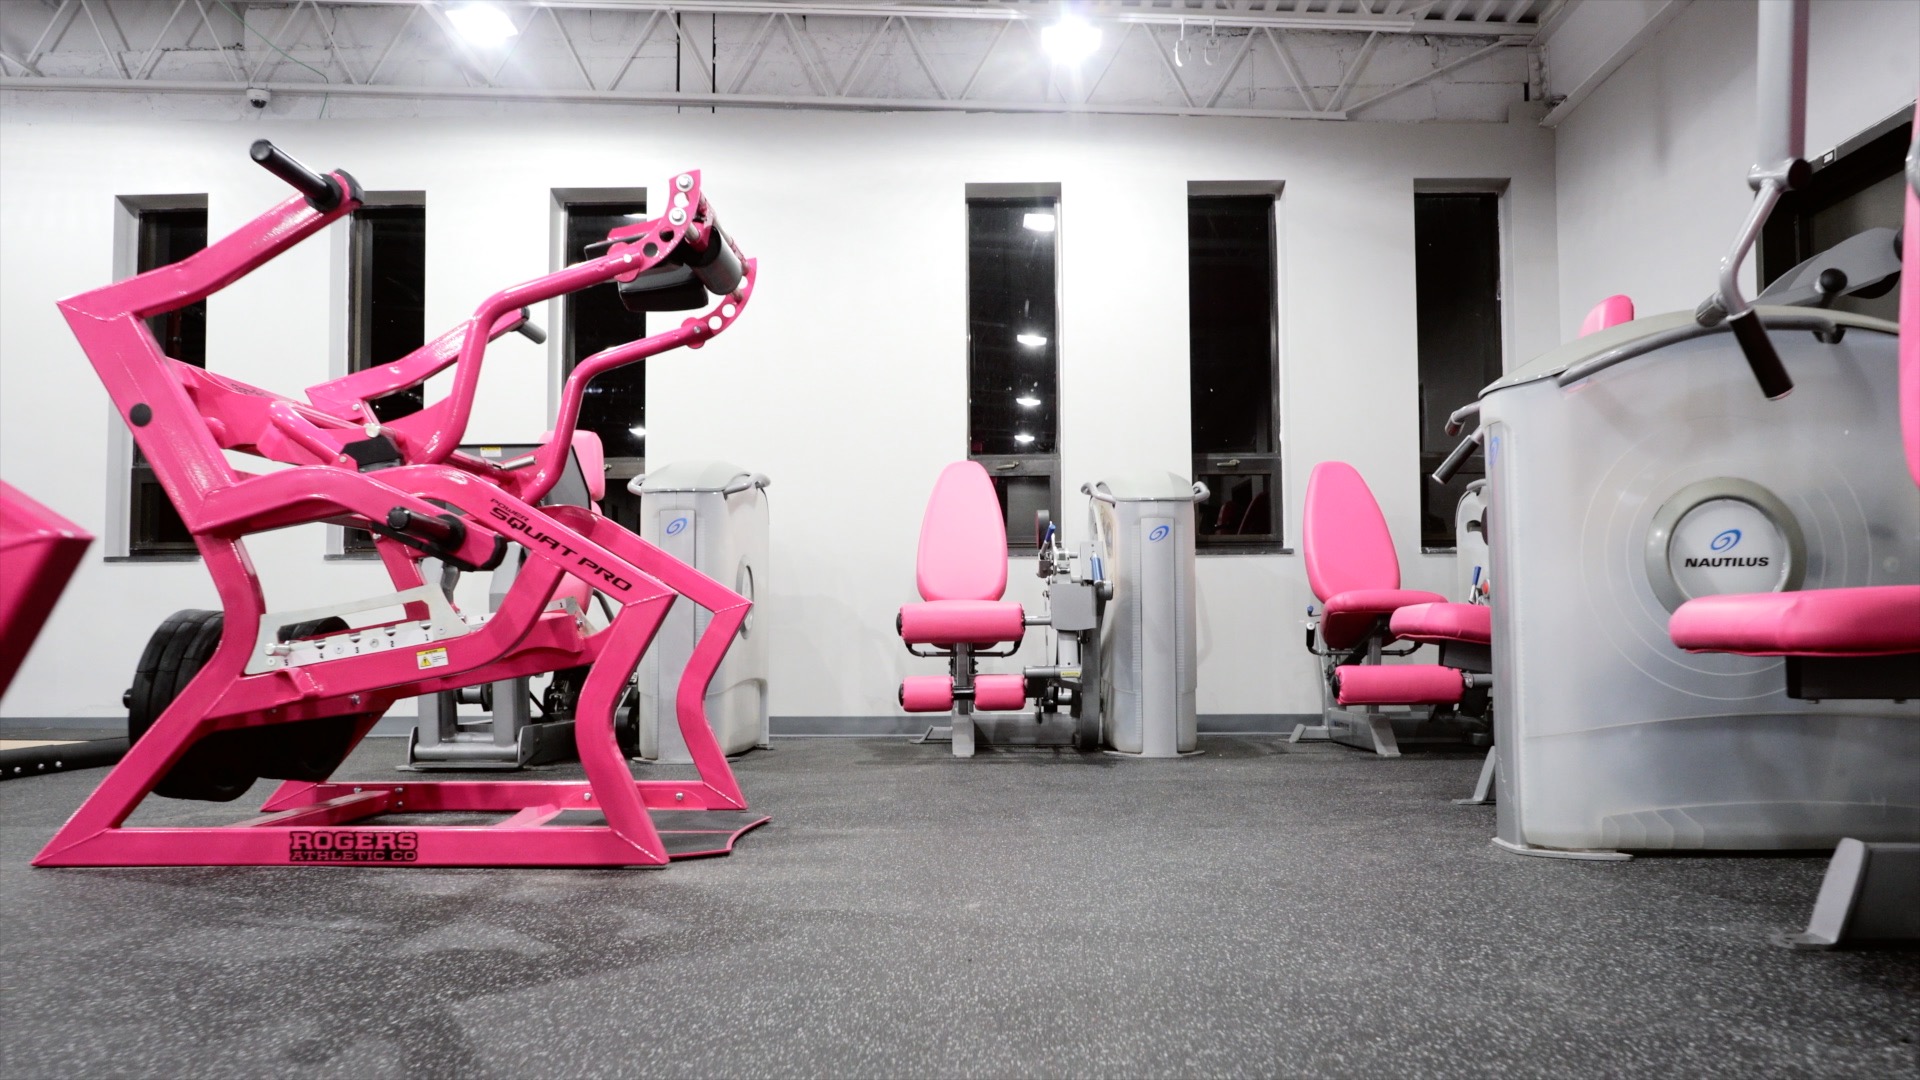 The Pink Gym